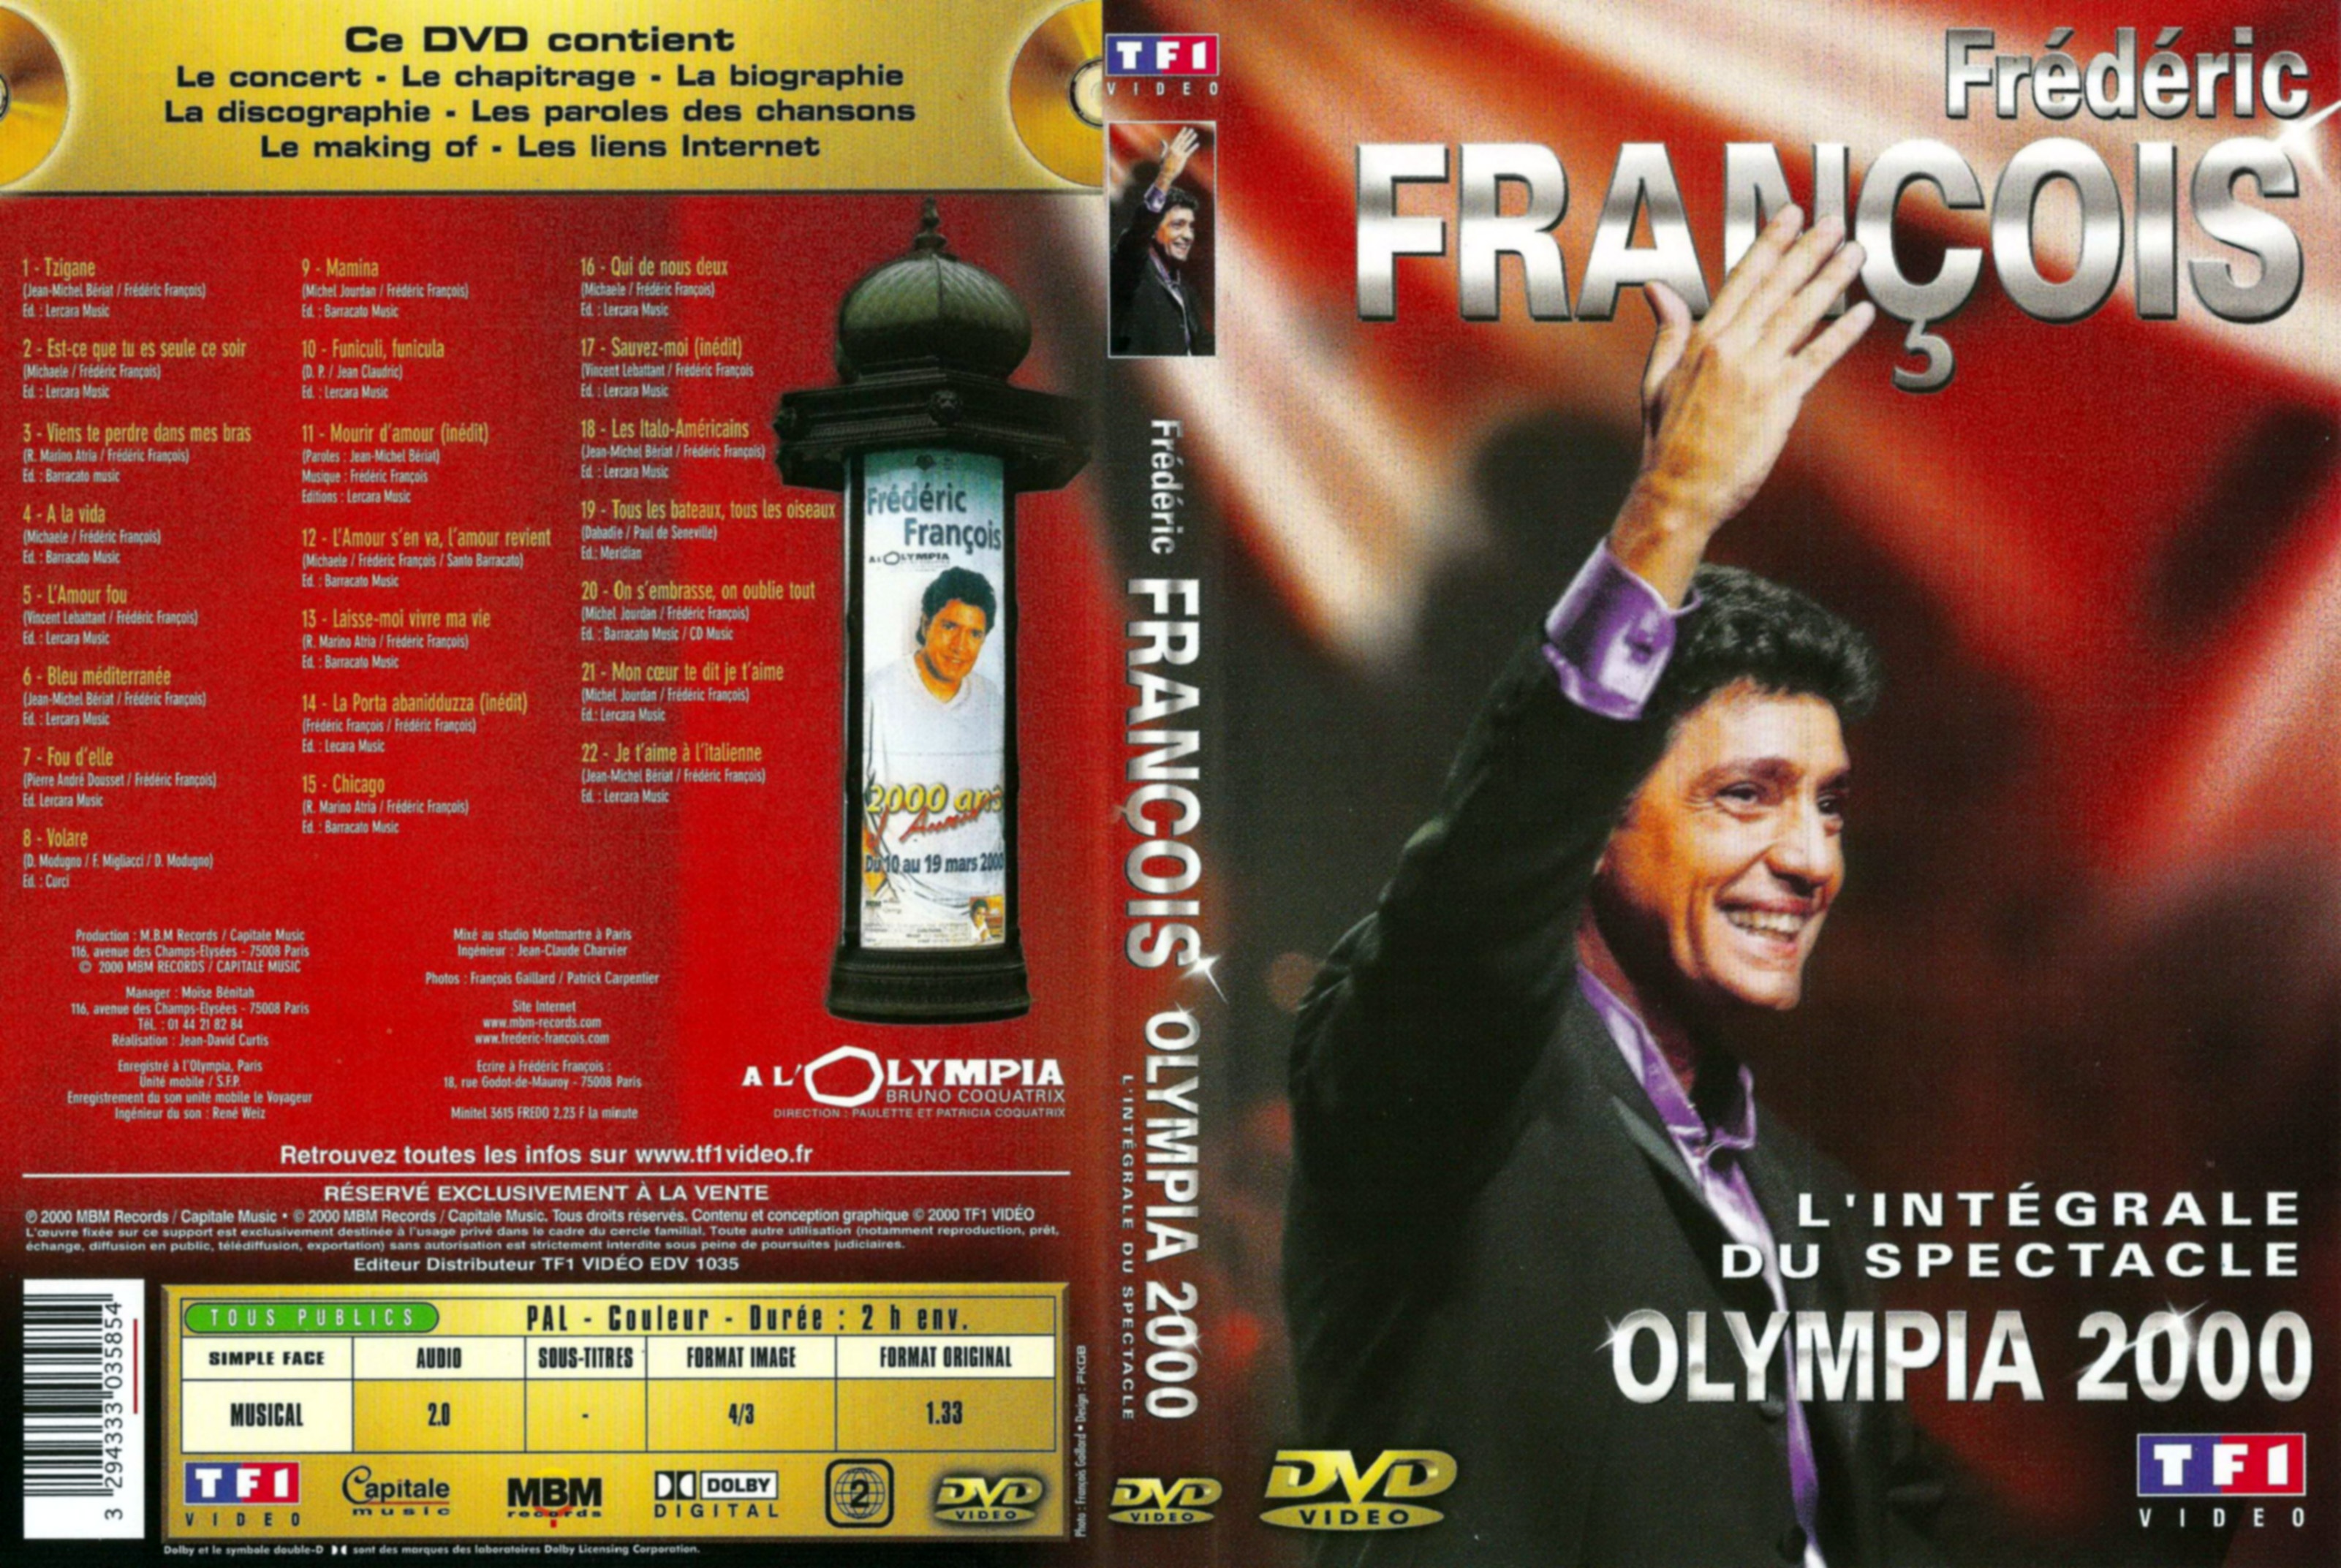 Jaquette DVD Frederic Francois - Olympia 2000